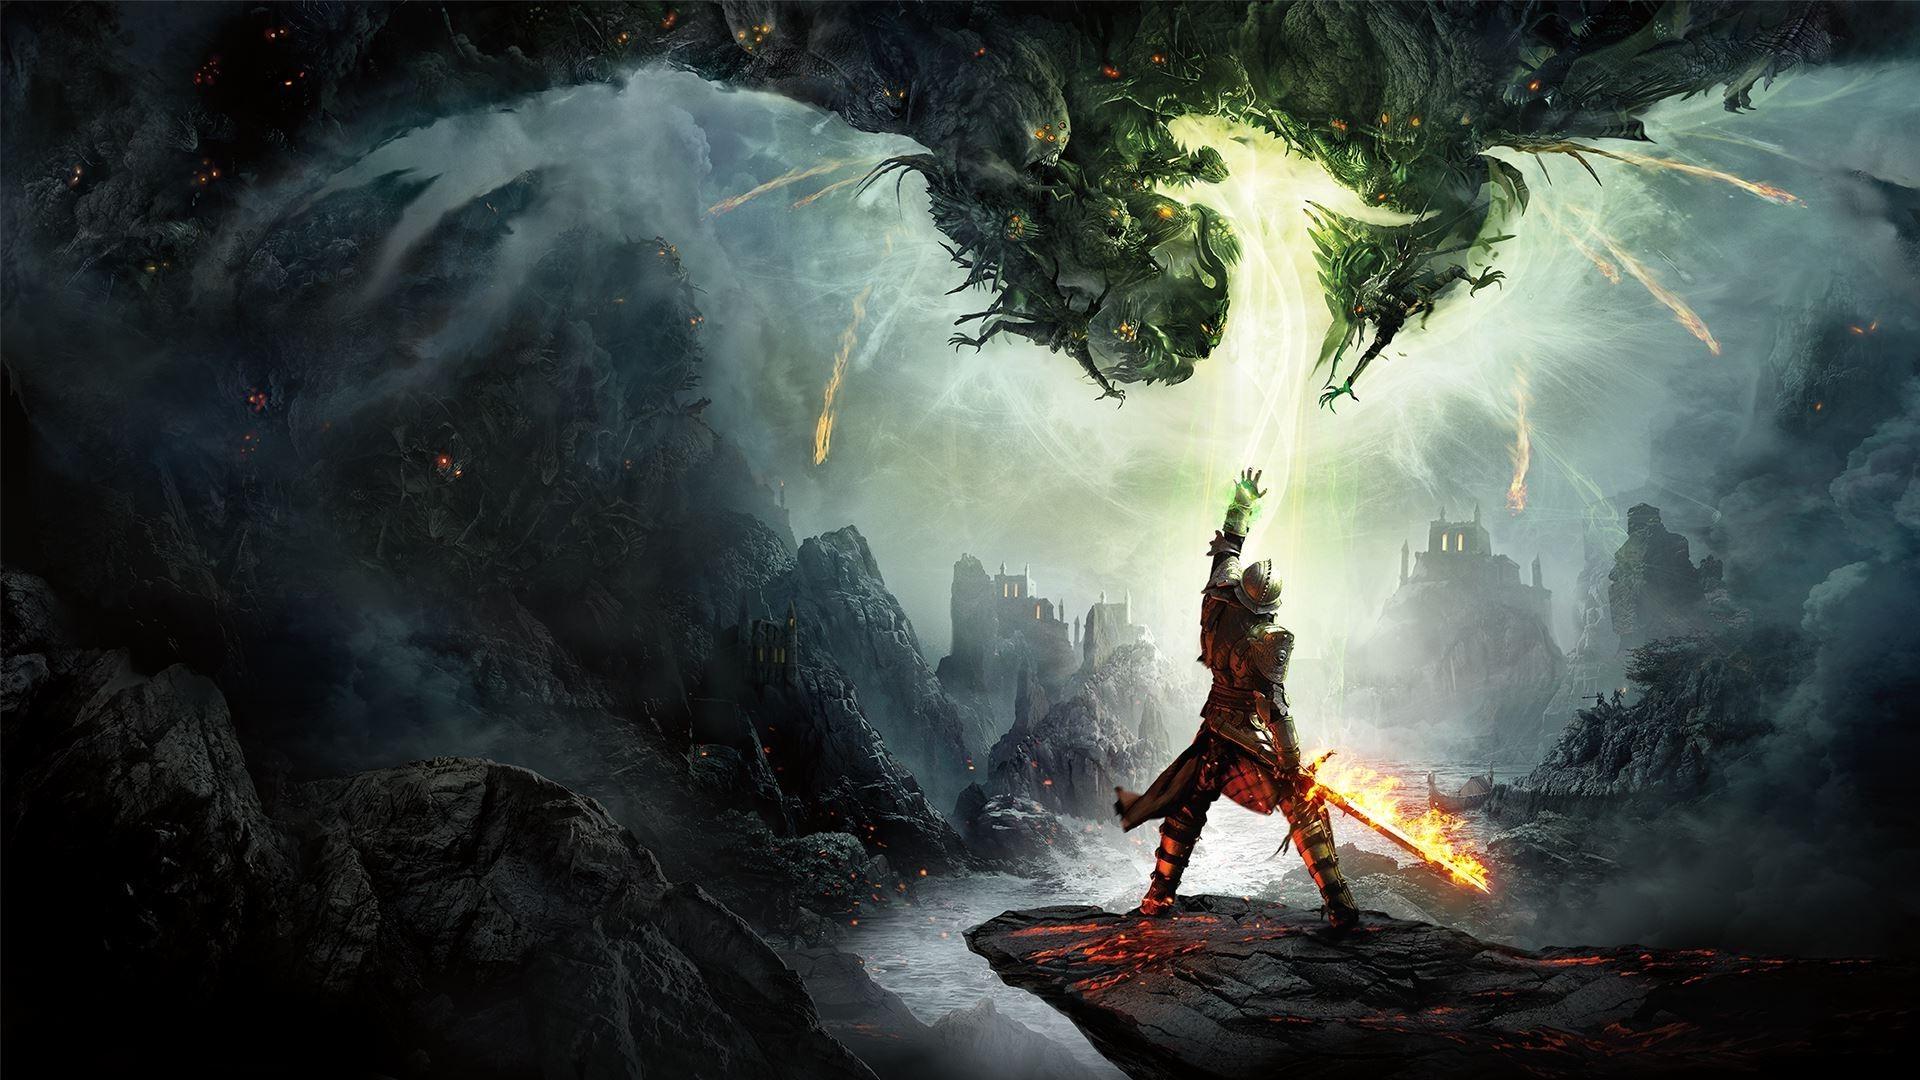 Dragon Age Inquisition Wallpapers - Top Free Dragon Age Inquisition